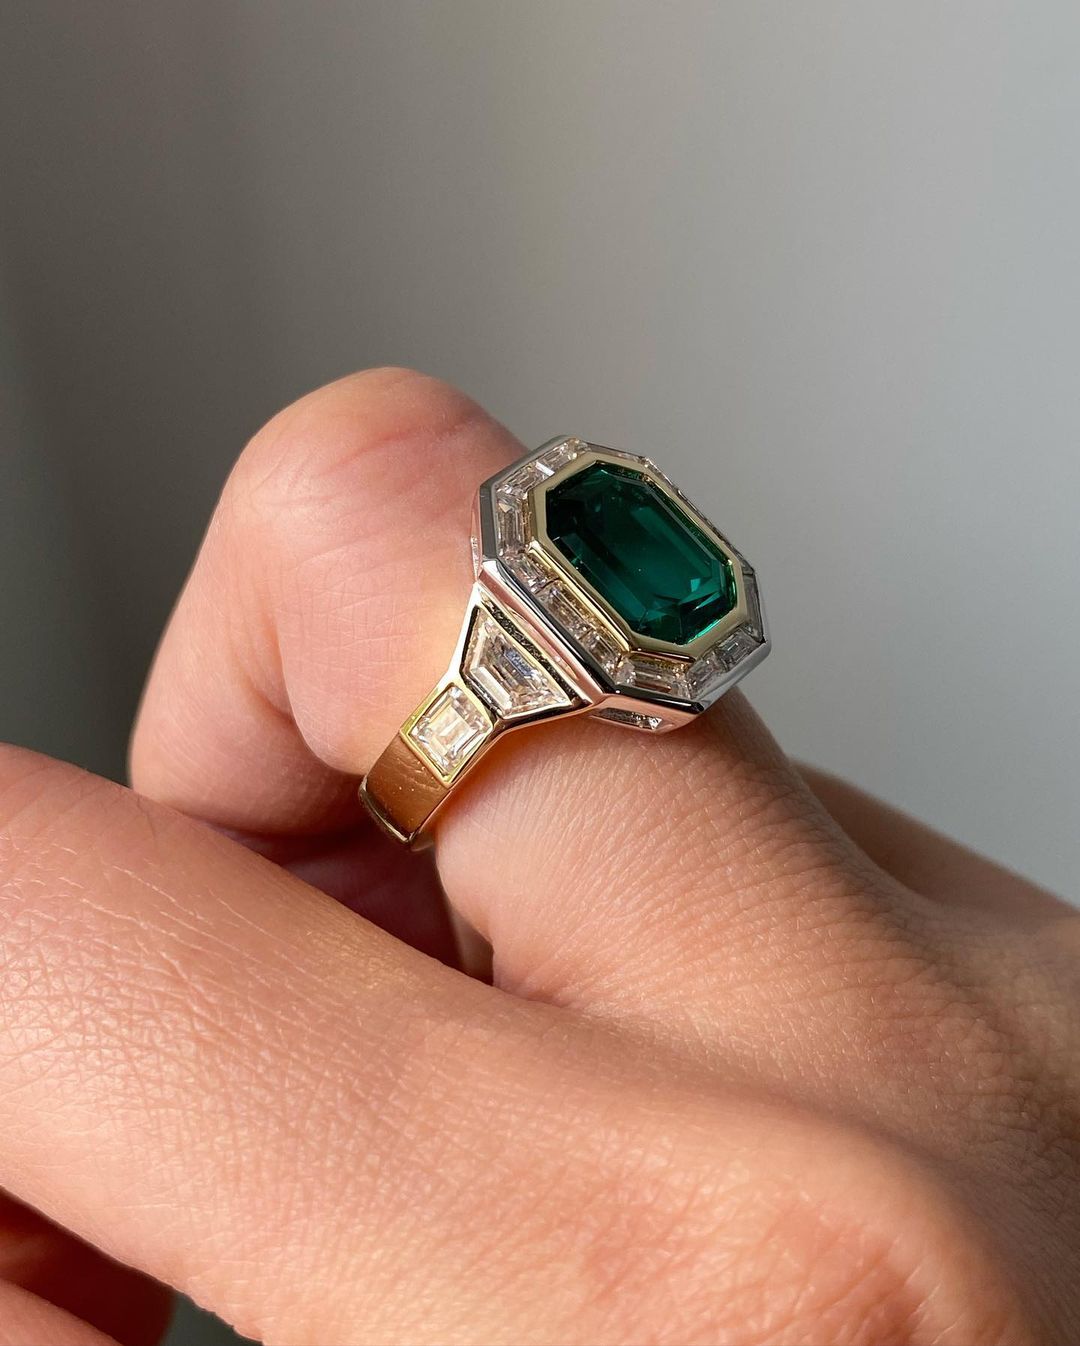 Emerald Engagement Ring, Halo Wedding Ring Art Deco Emerald Bridal Gifted Ring